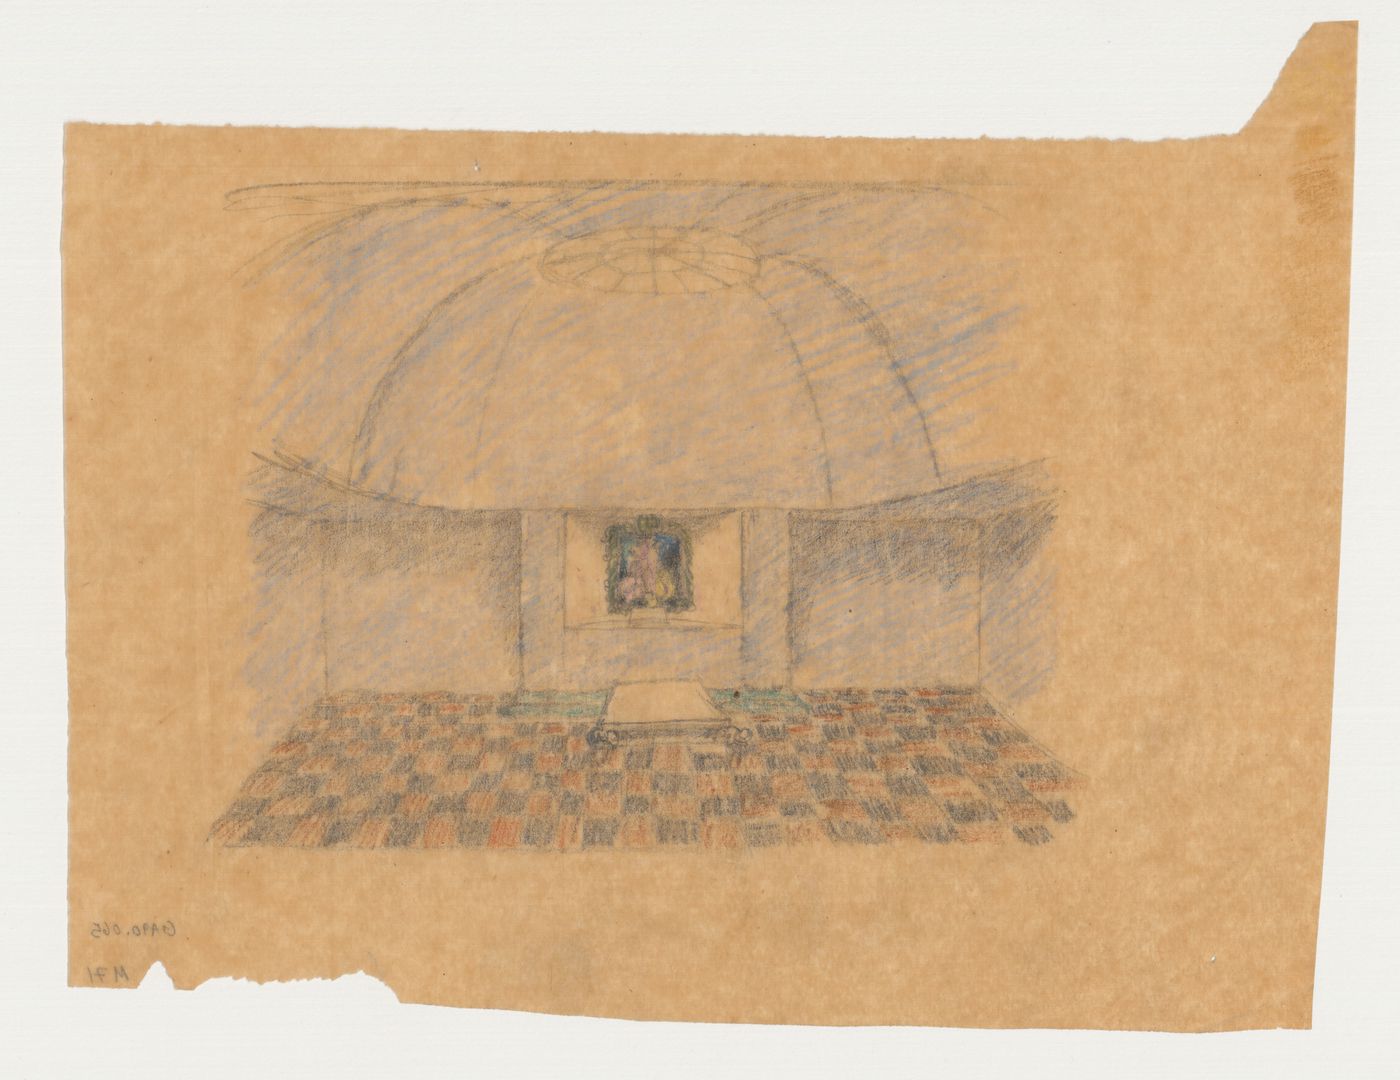 Interior perspective for Woodland Chapel showing the catafalque and sepulcher, Woodland Cemetery, Stockholm, Sweden